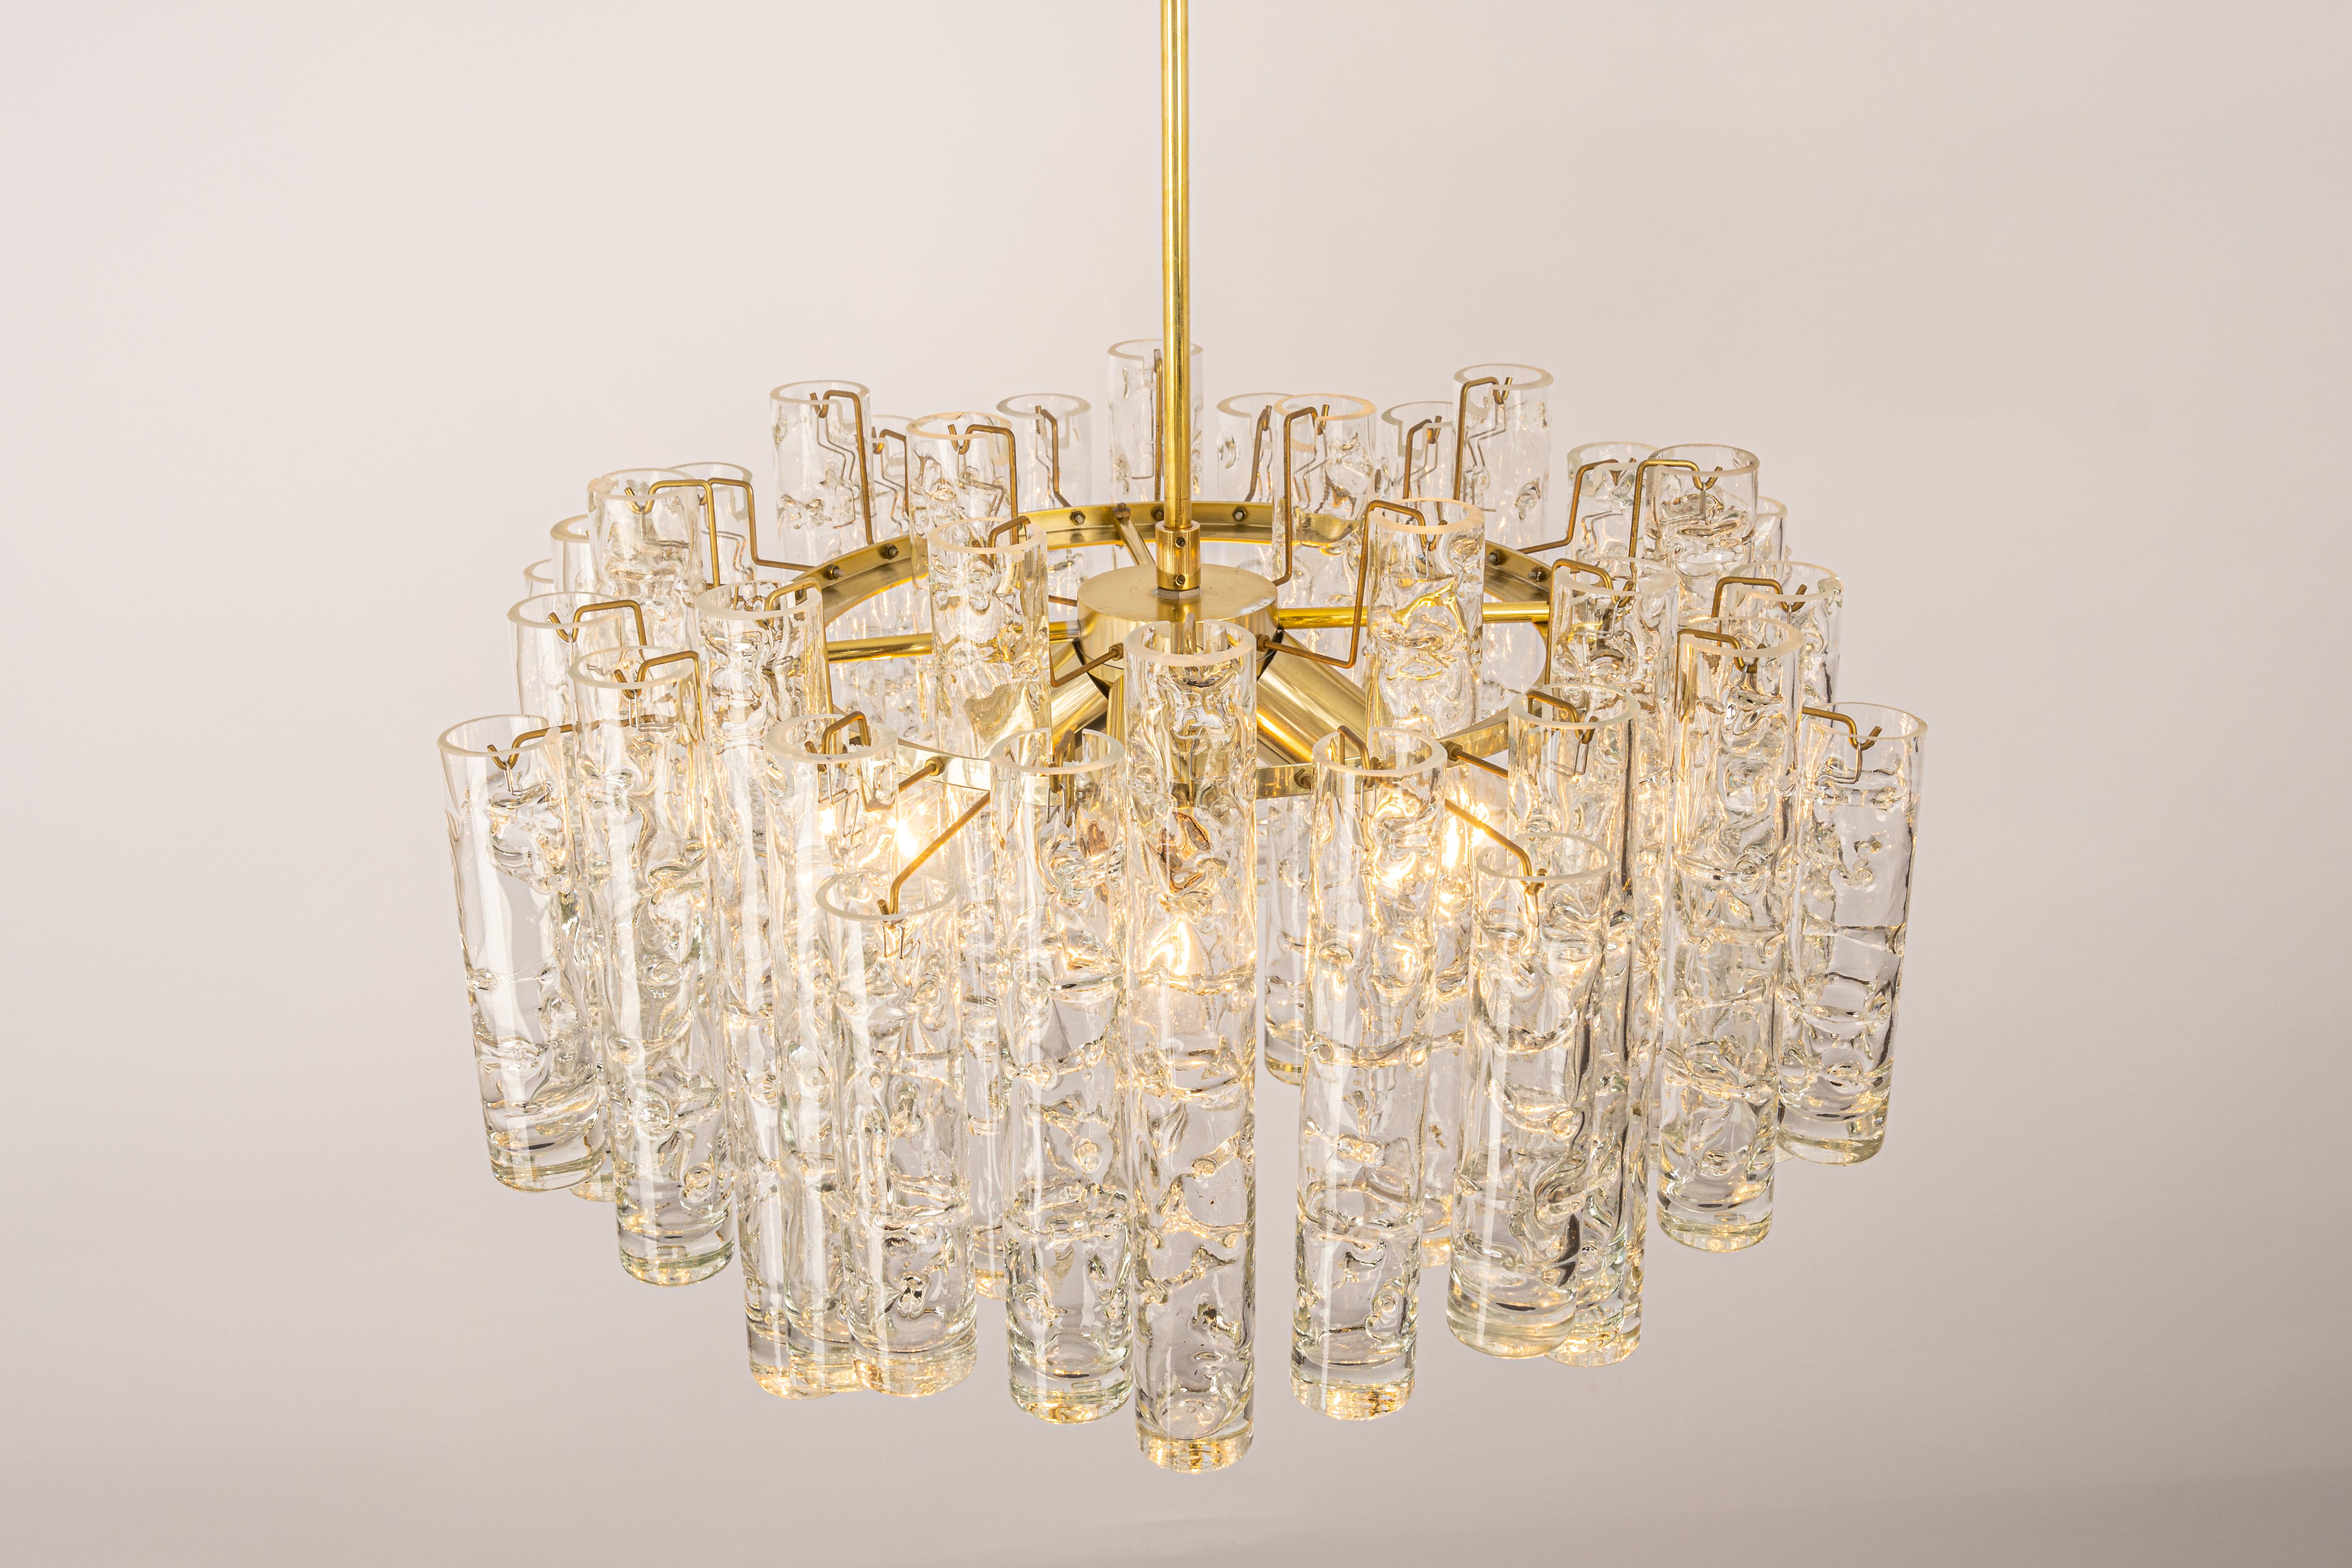 1 of 4 Stunning Murano Glass Tubes Chandelier by Doria, Germany, 1960s For Sale 3